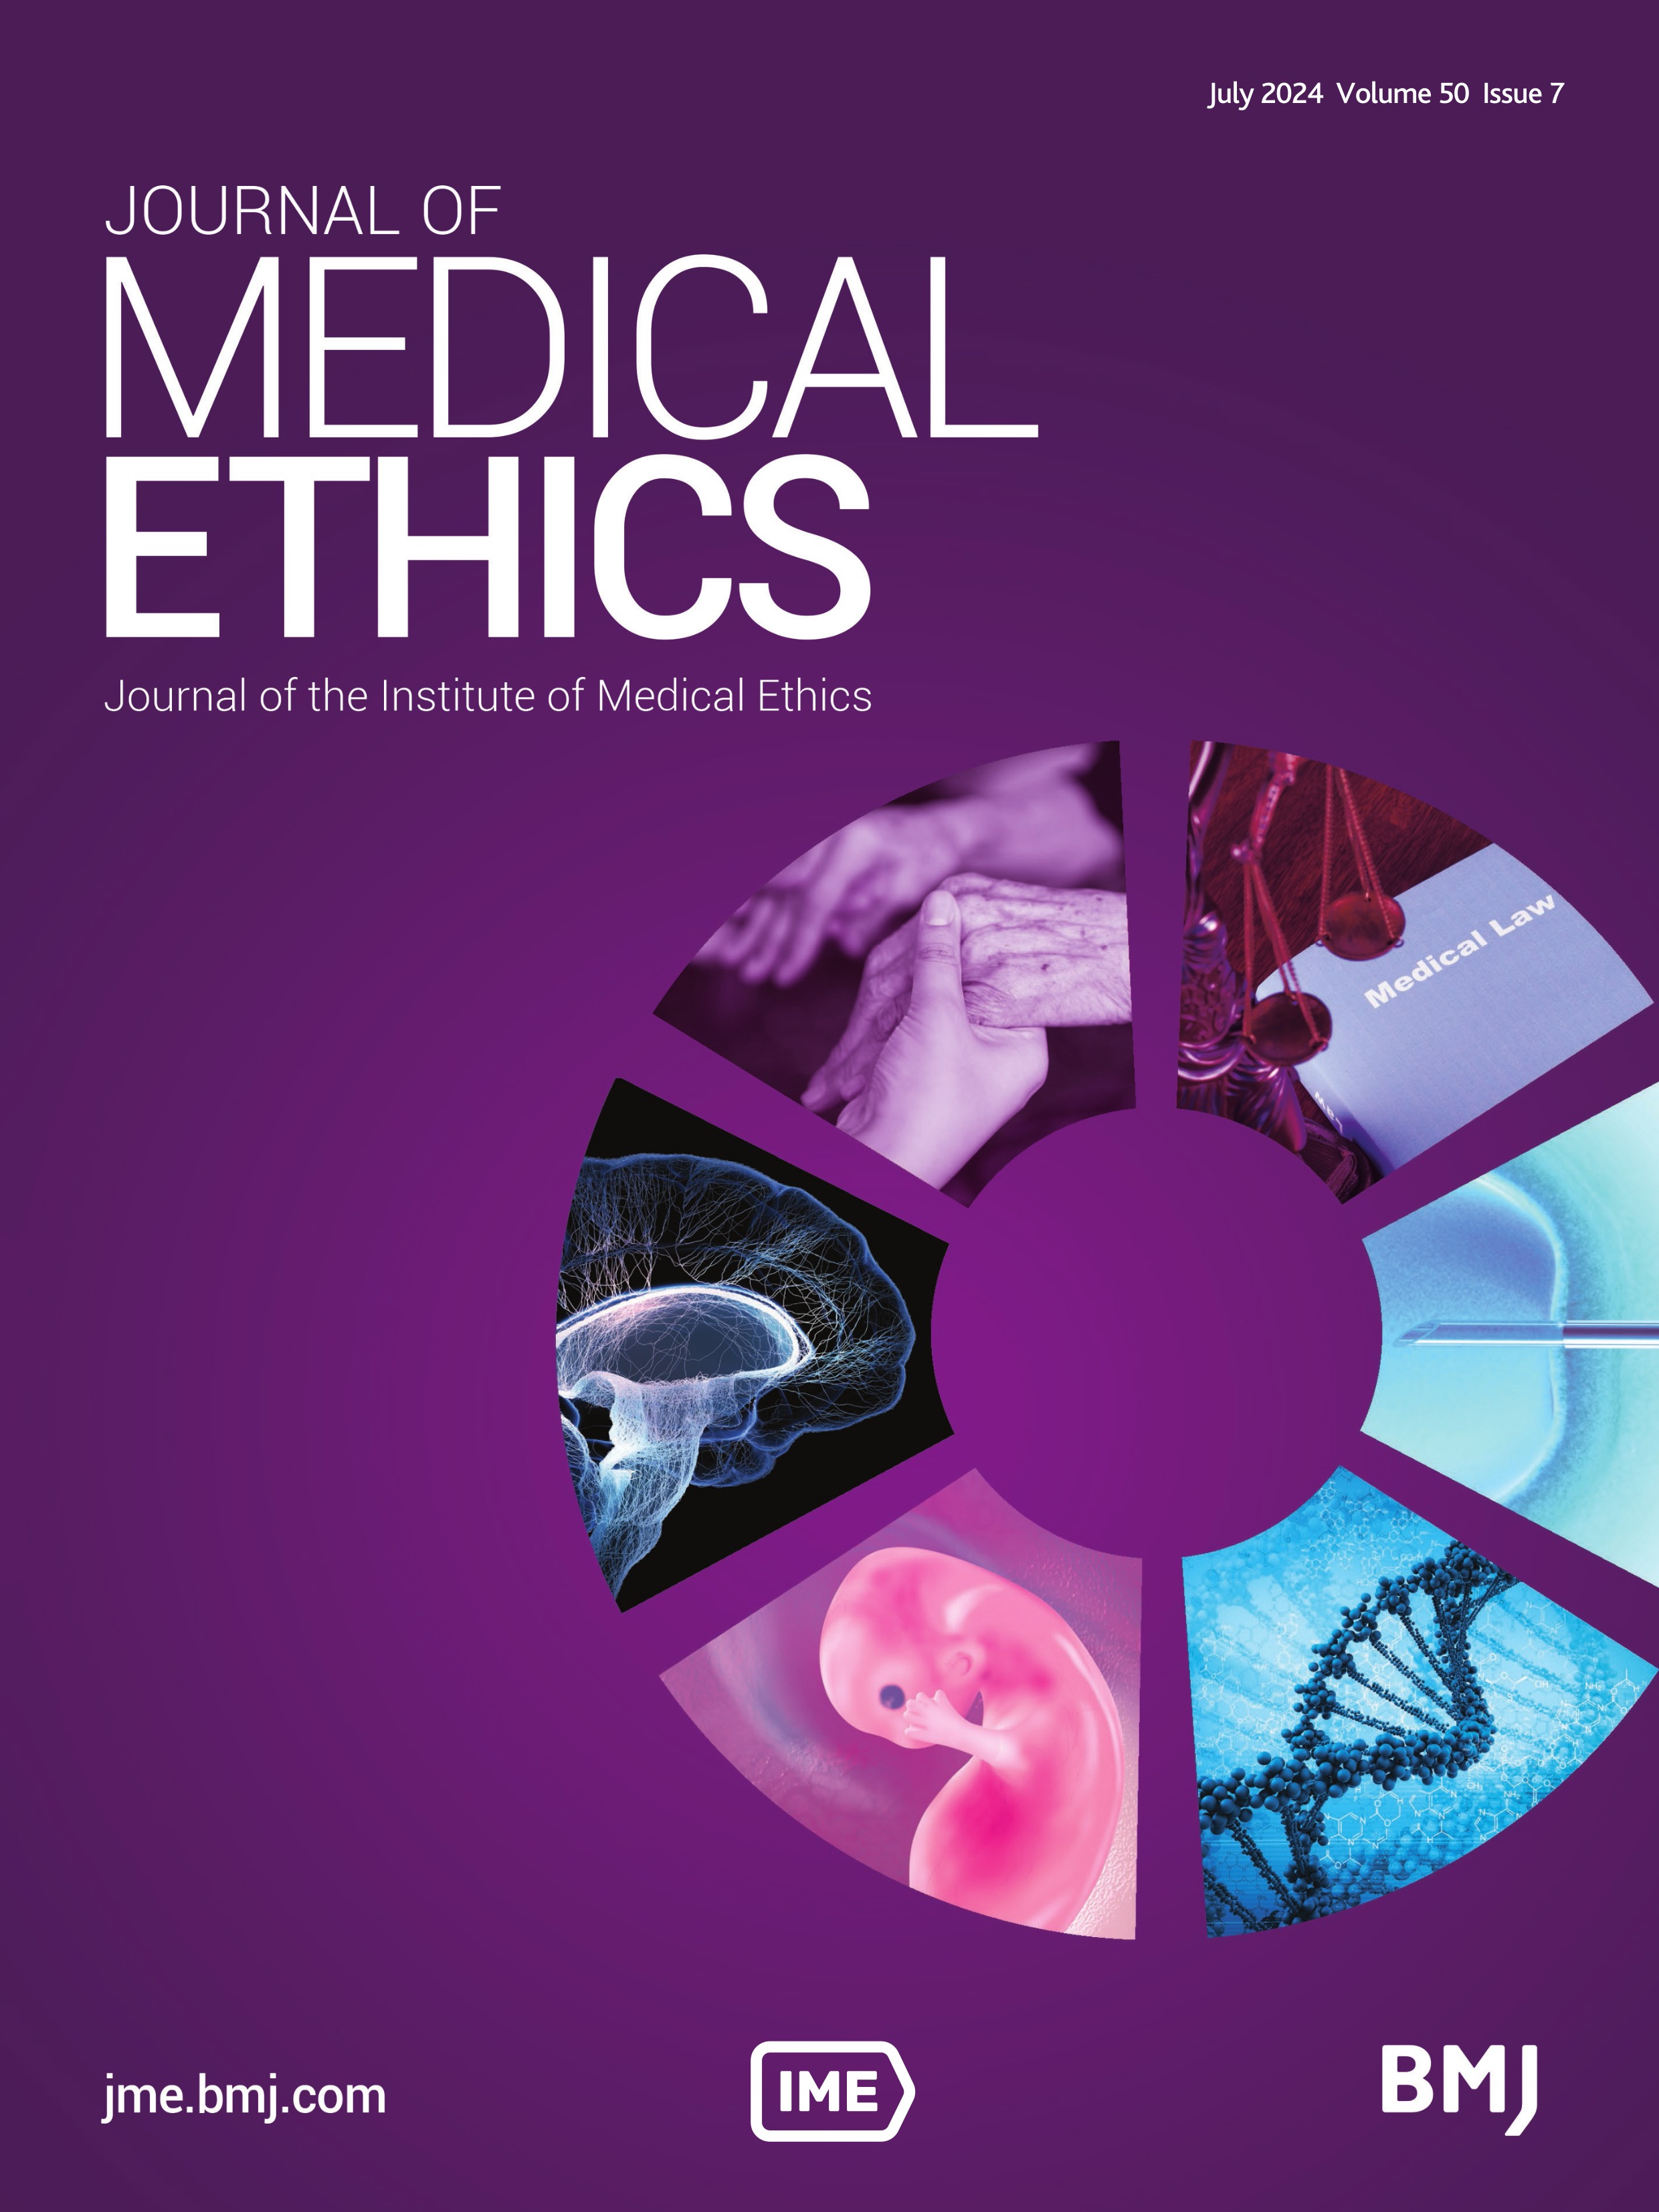 Green bioethics, patient autonomy and informed consent in healthcare